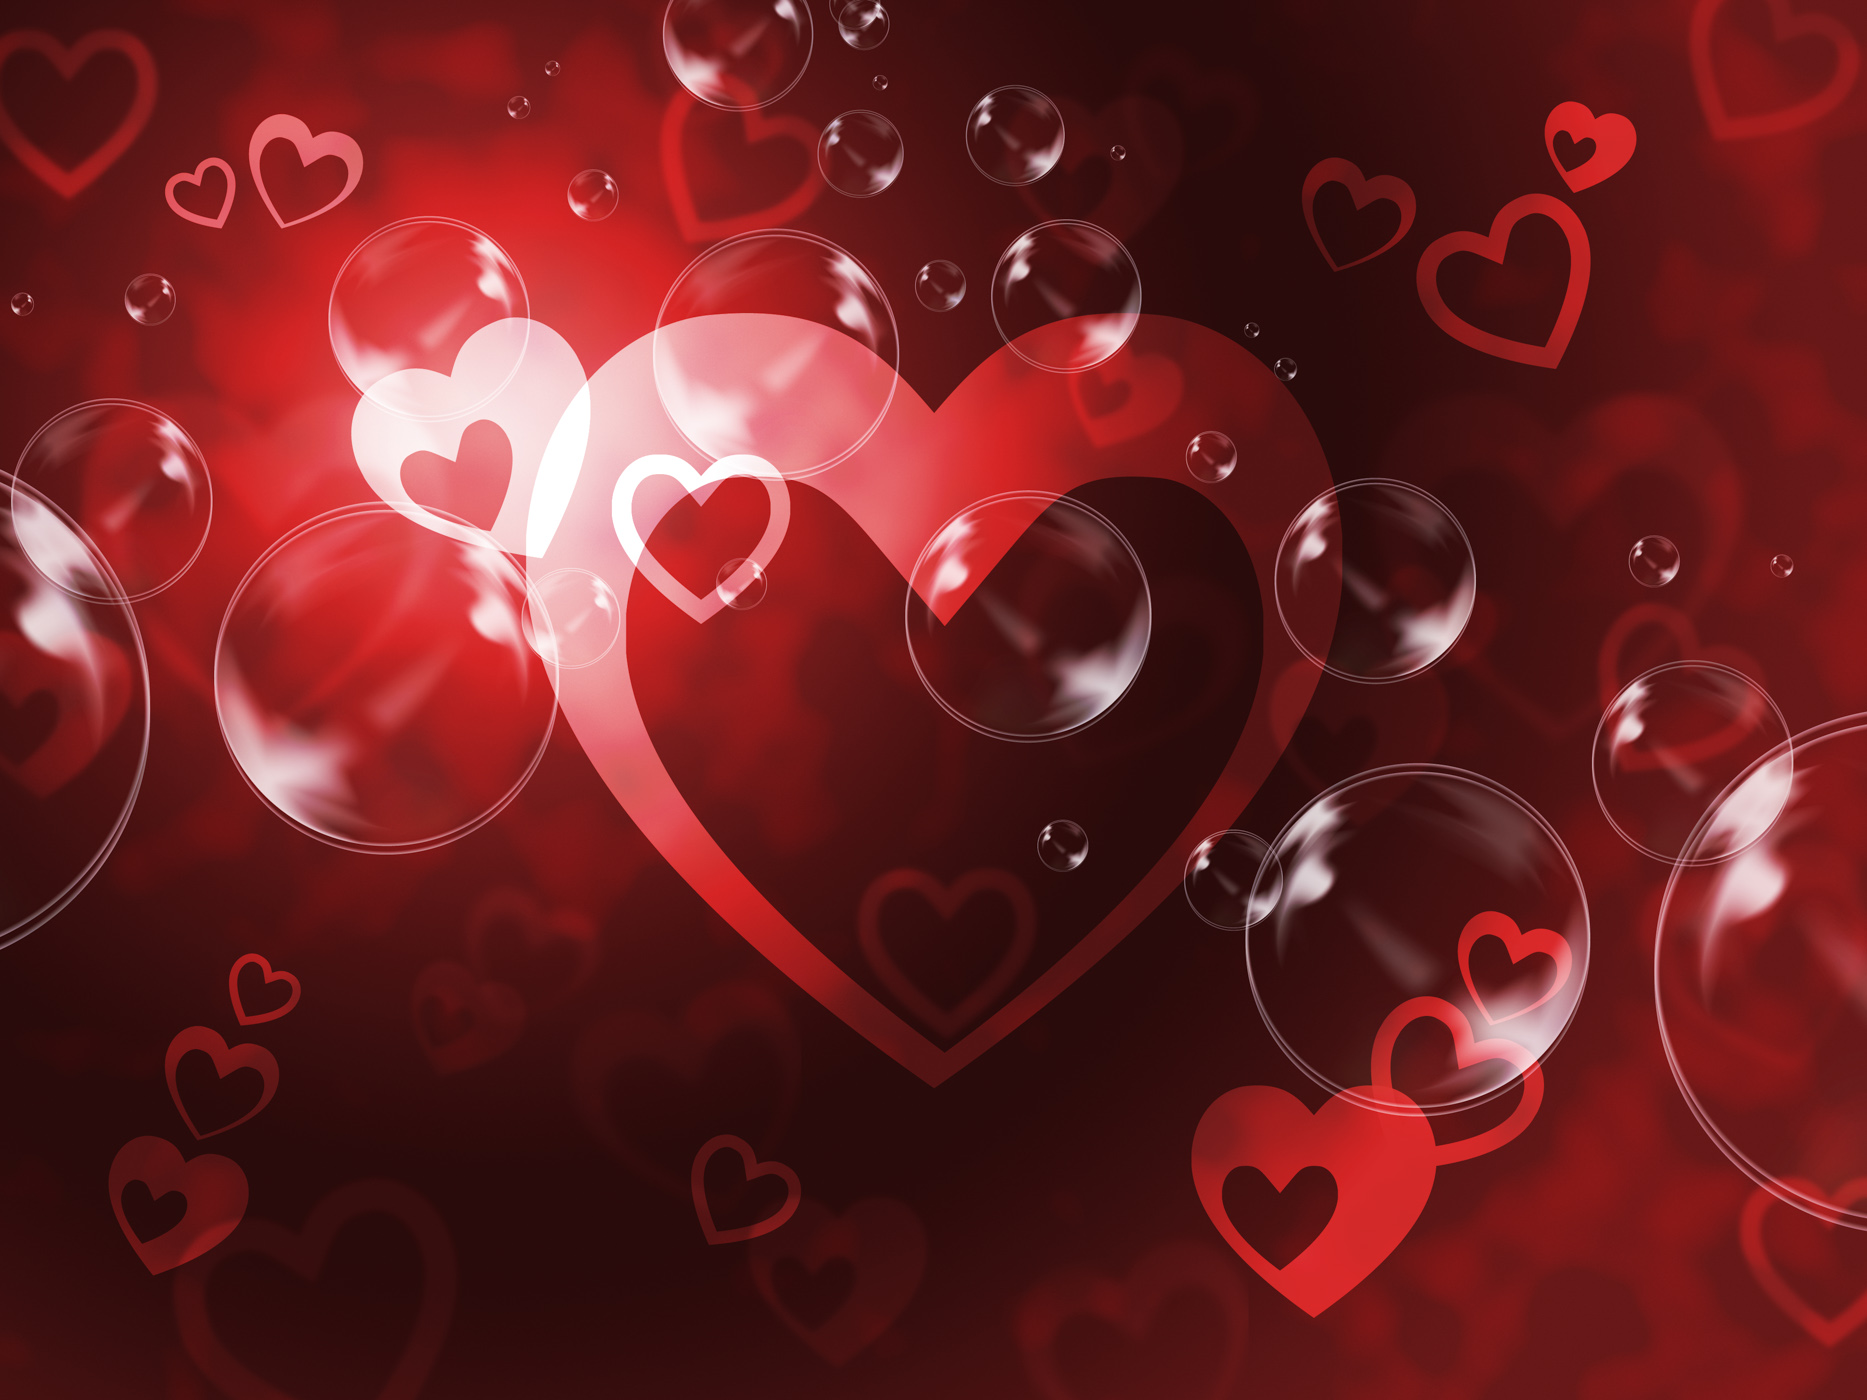 Hearts Background Means Passionate Wallpaper Or Loving - Loving Background - HD Wallpaper 